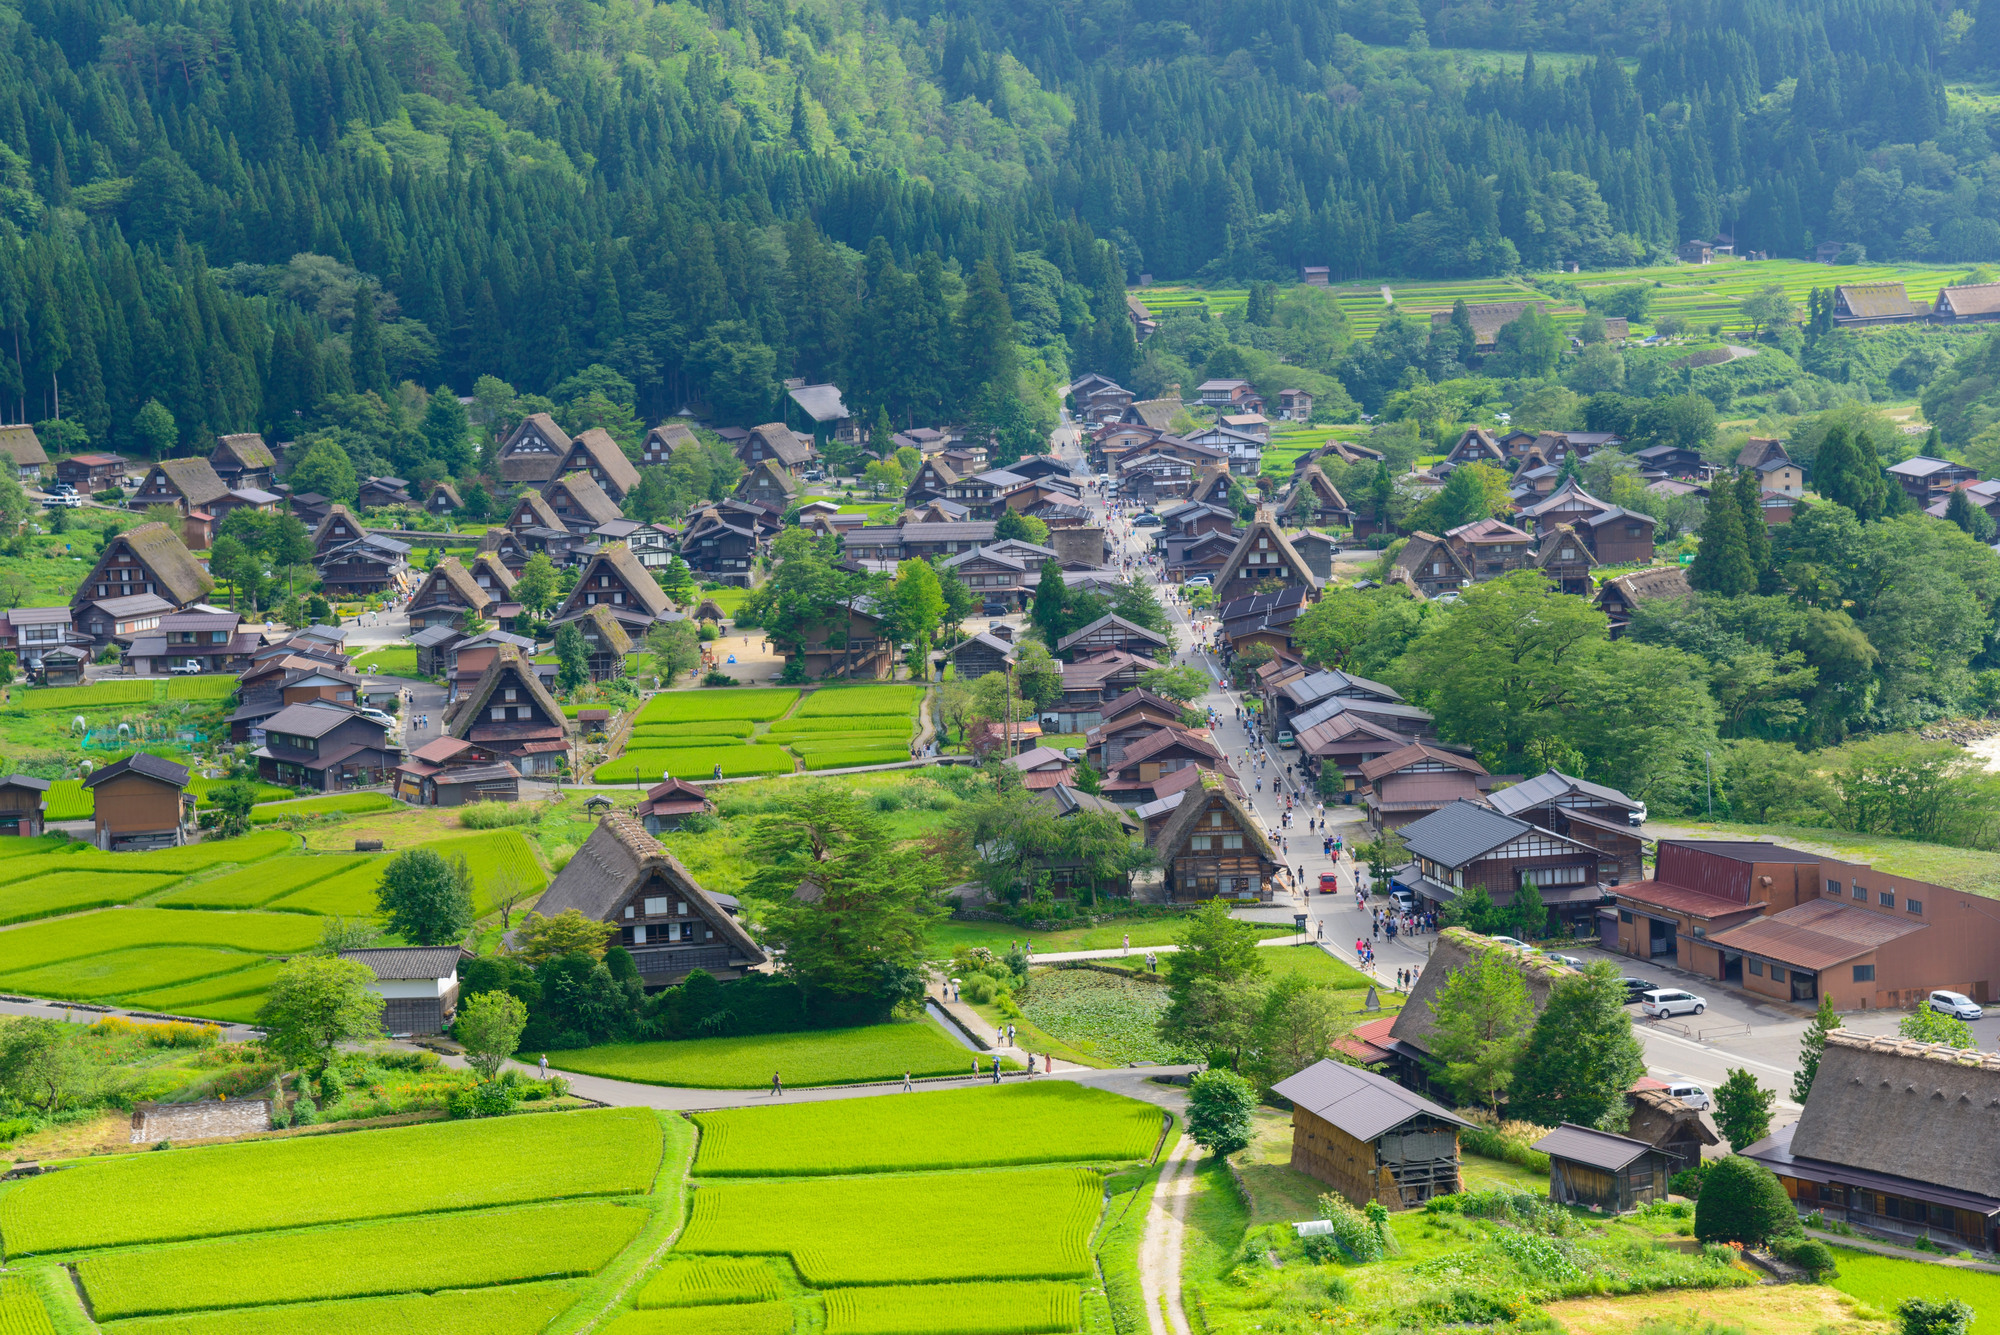 An aerial view of a village in japan.